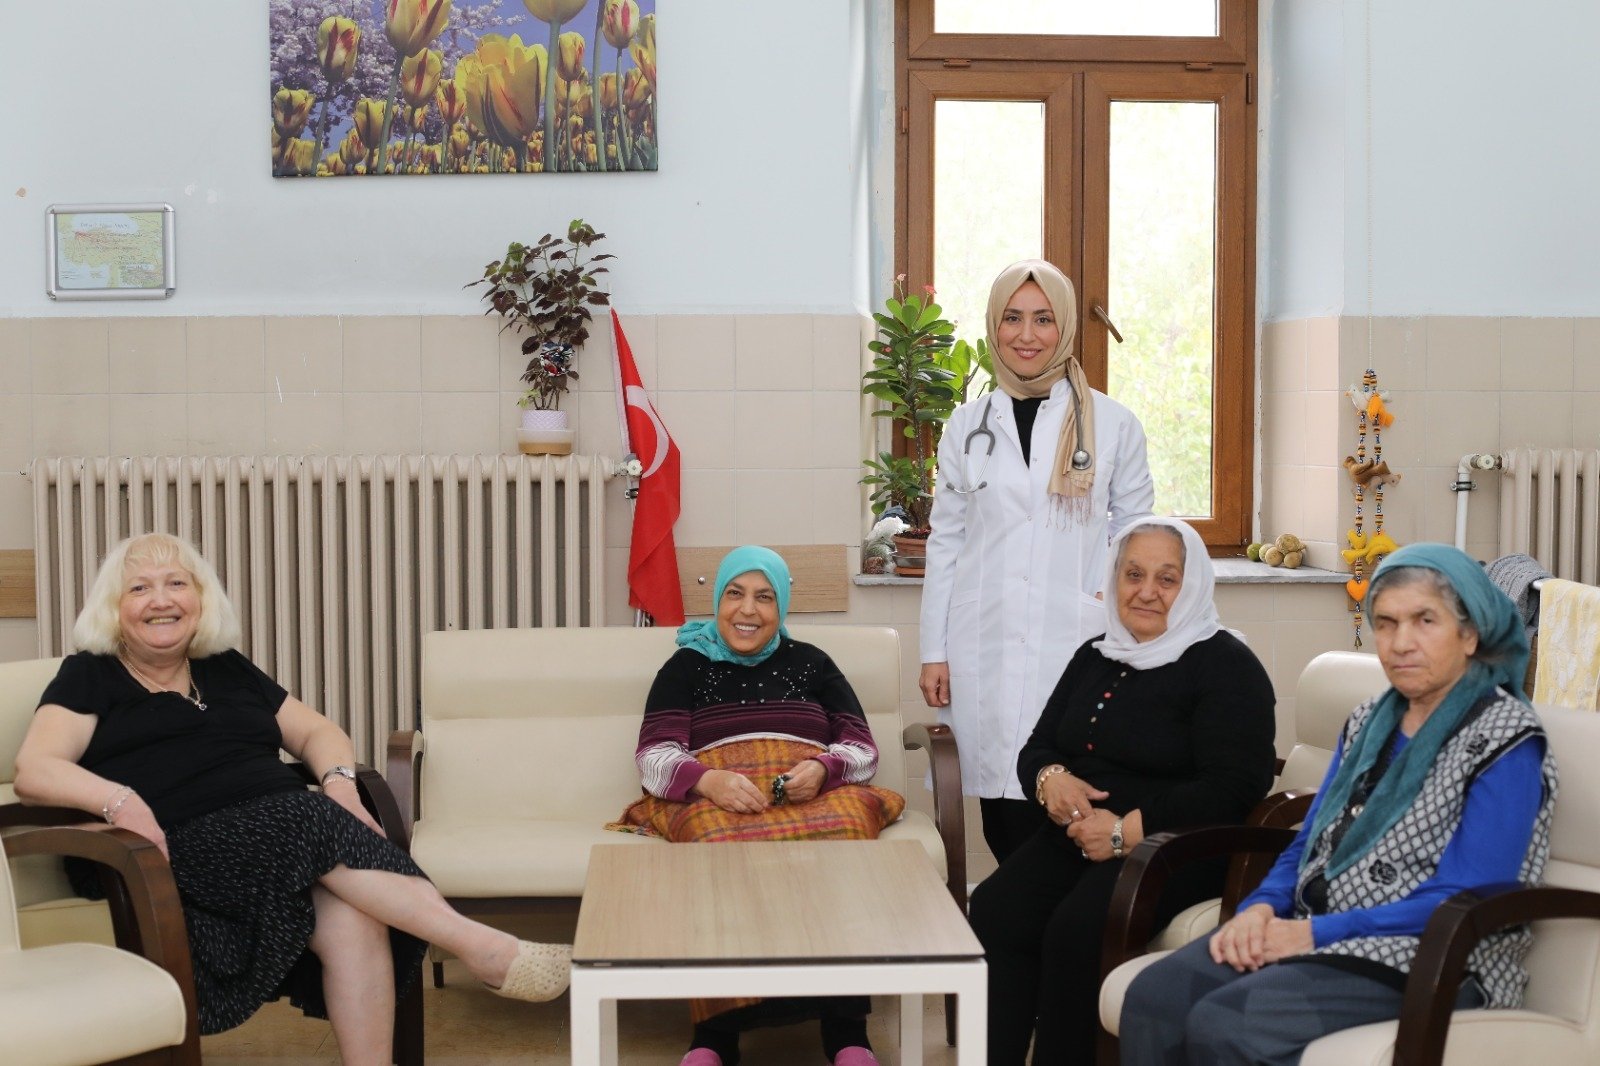 Dr. Filiz Tırtır (3rd L) poses with residents of the nursing home, in Istanbul, Turkey, Dec. 13, 2021. (Photo by Hatice Çinar)